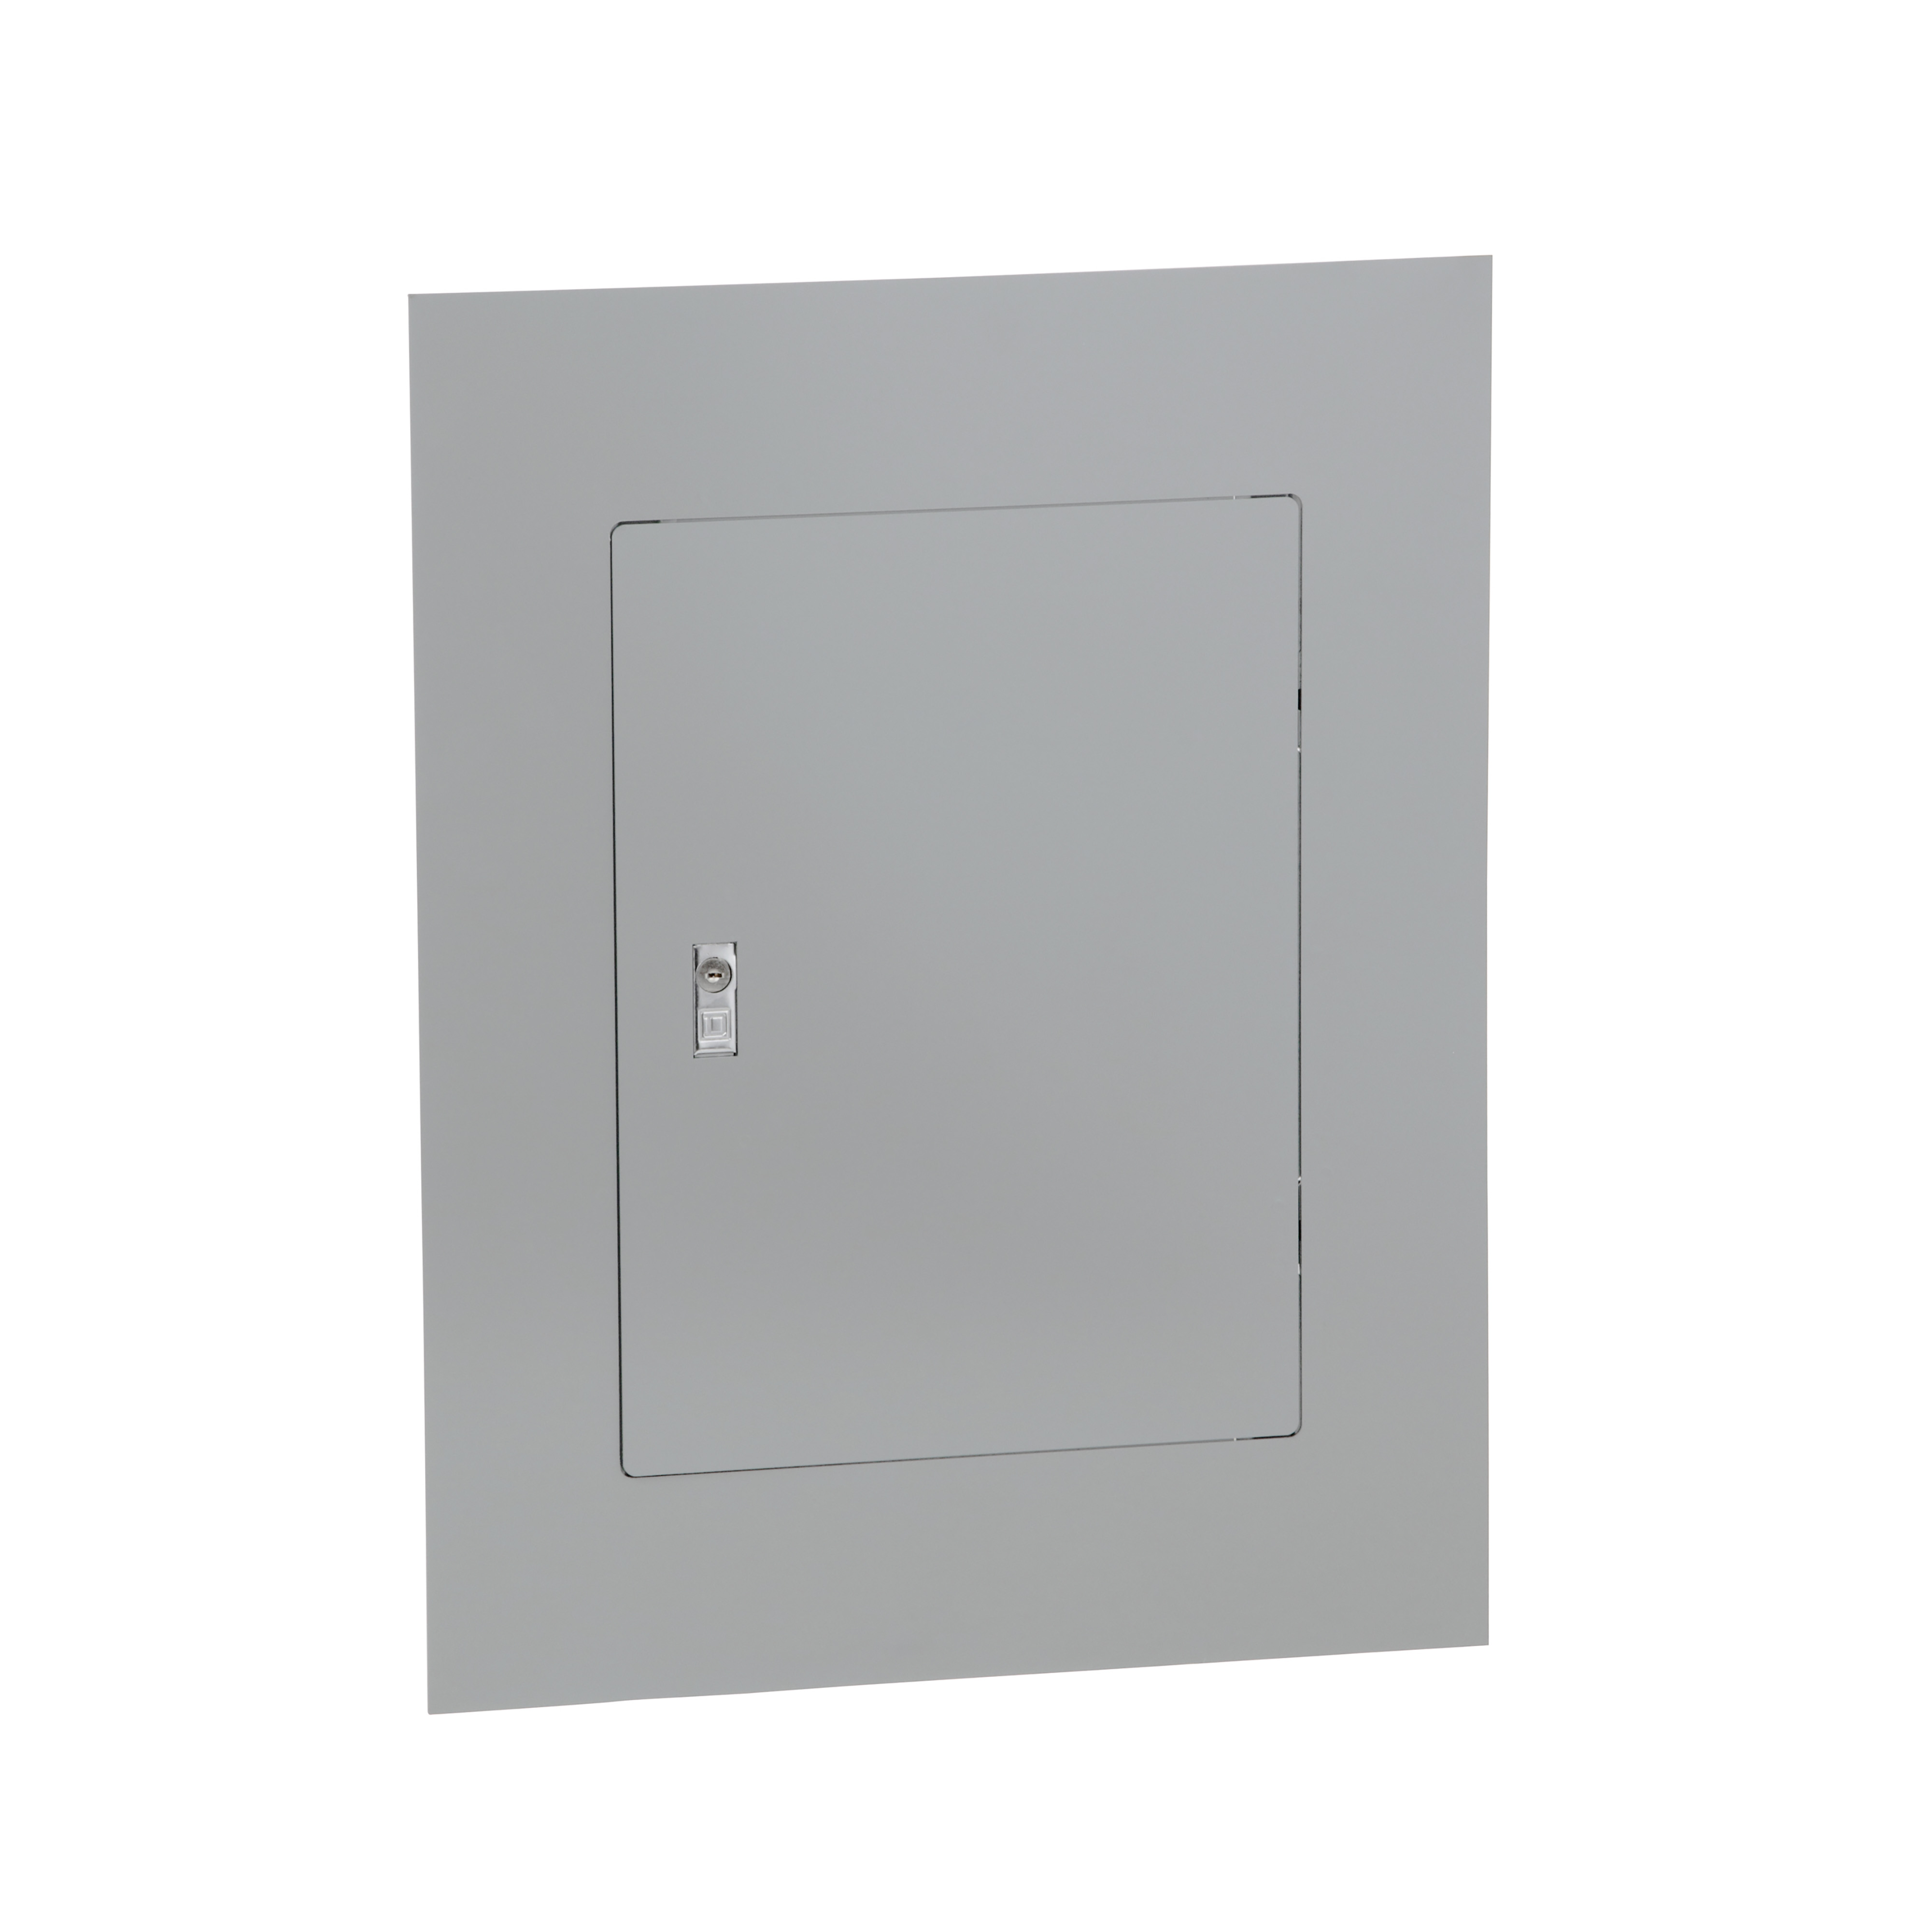 SQUARE D NC26S : PANELBOARD COVER/TRIM NF TYPE 1 S 26H